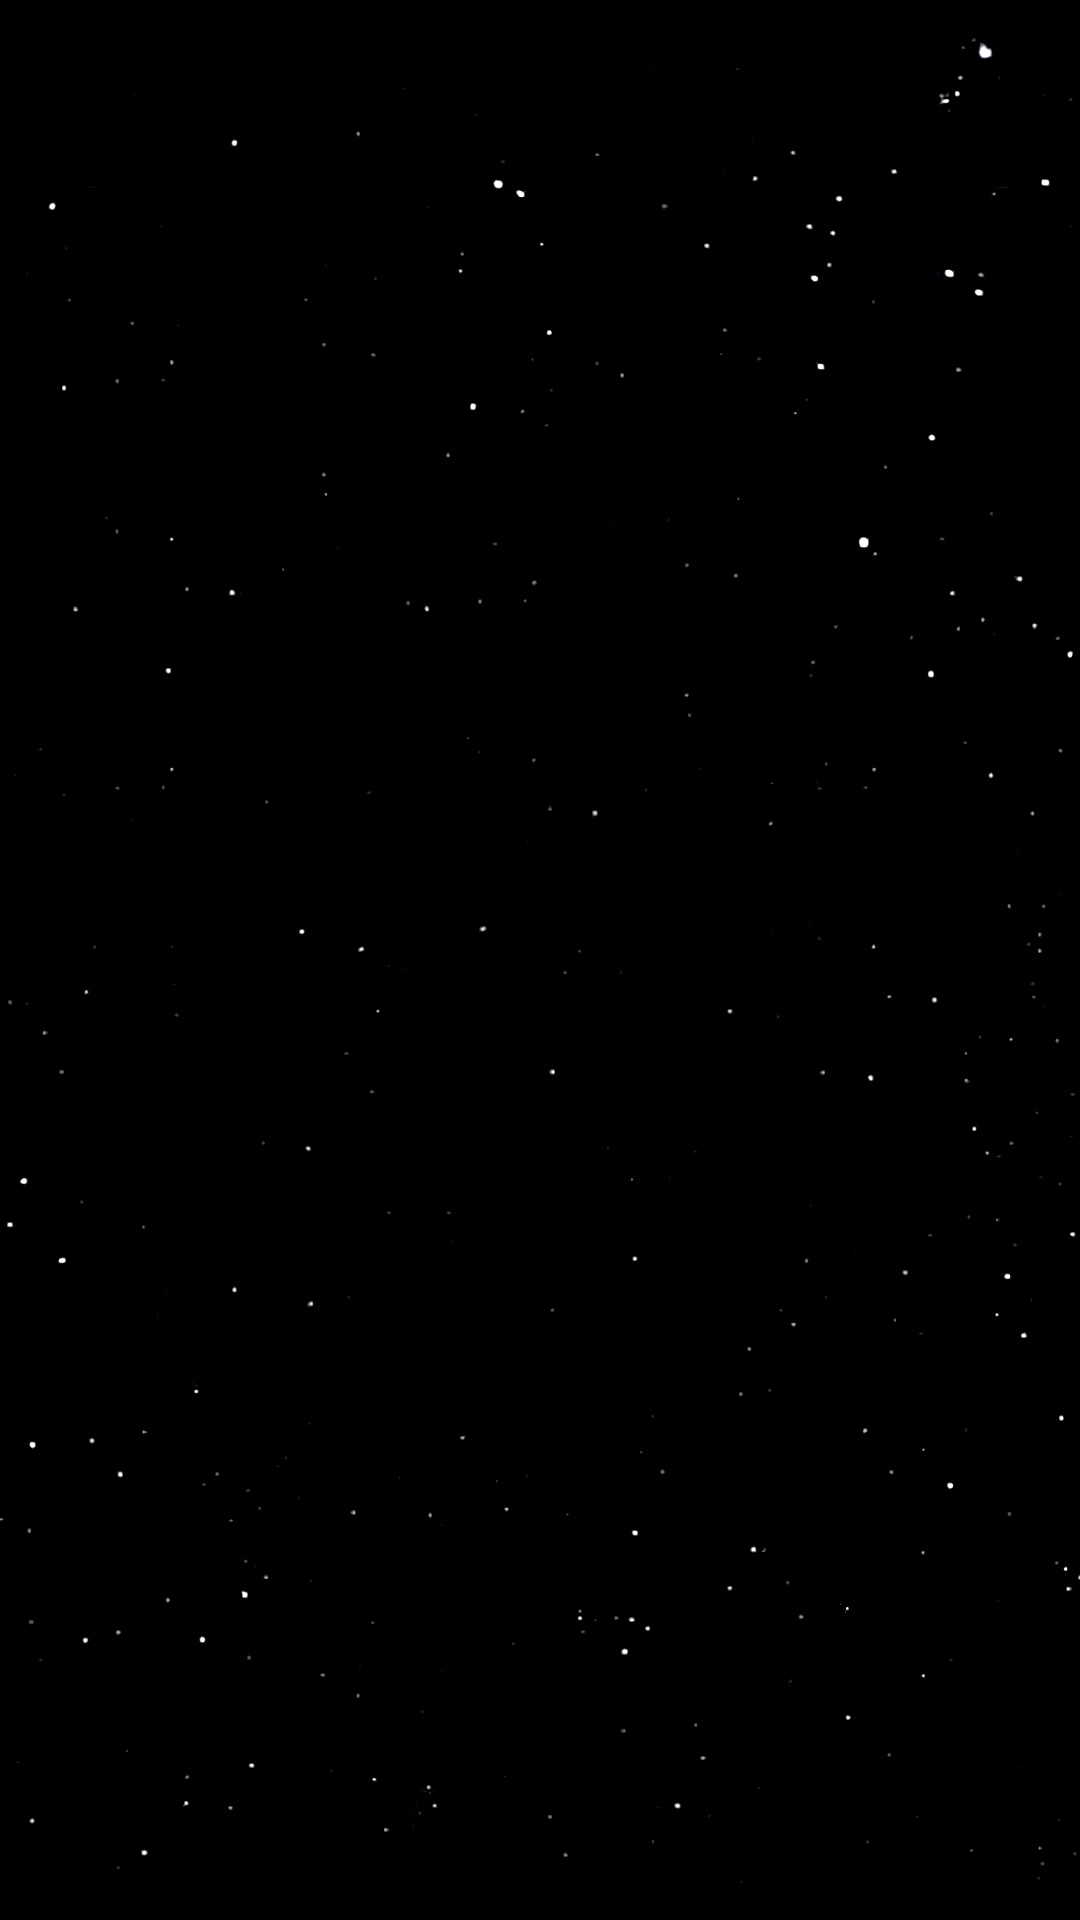 Stars Aesthetic iPhone Screen Lock Wallpaper with high-resolution 1080x1920 pixel. You can set as wallpaper for Apple iPhone X, XS Max, XR, 8, 7, 6, SE, iPad. Enjoy and share your favorite HD wallpapers and background images